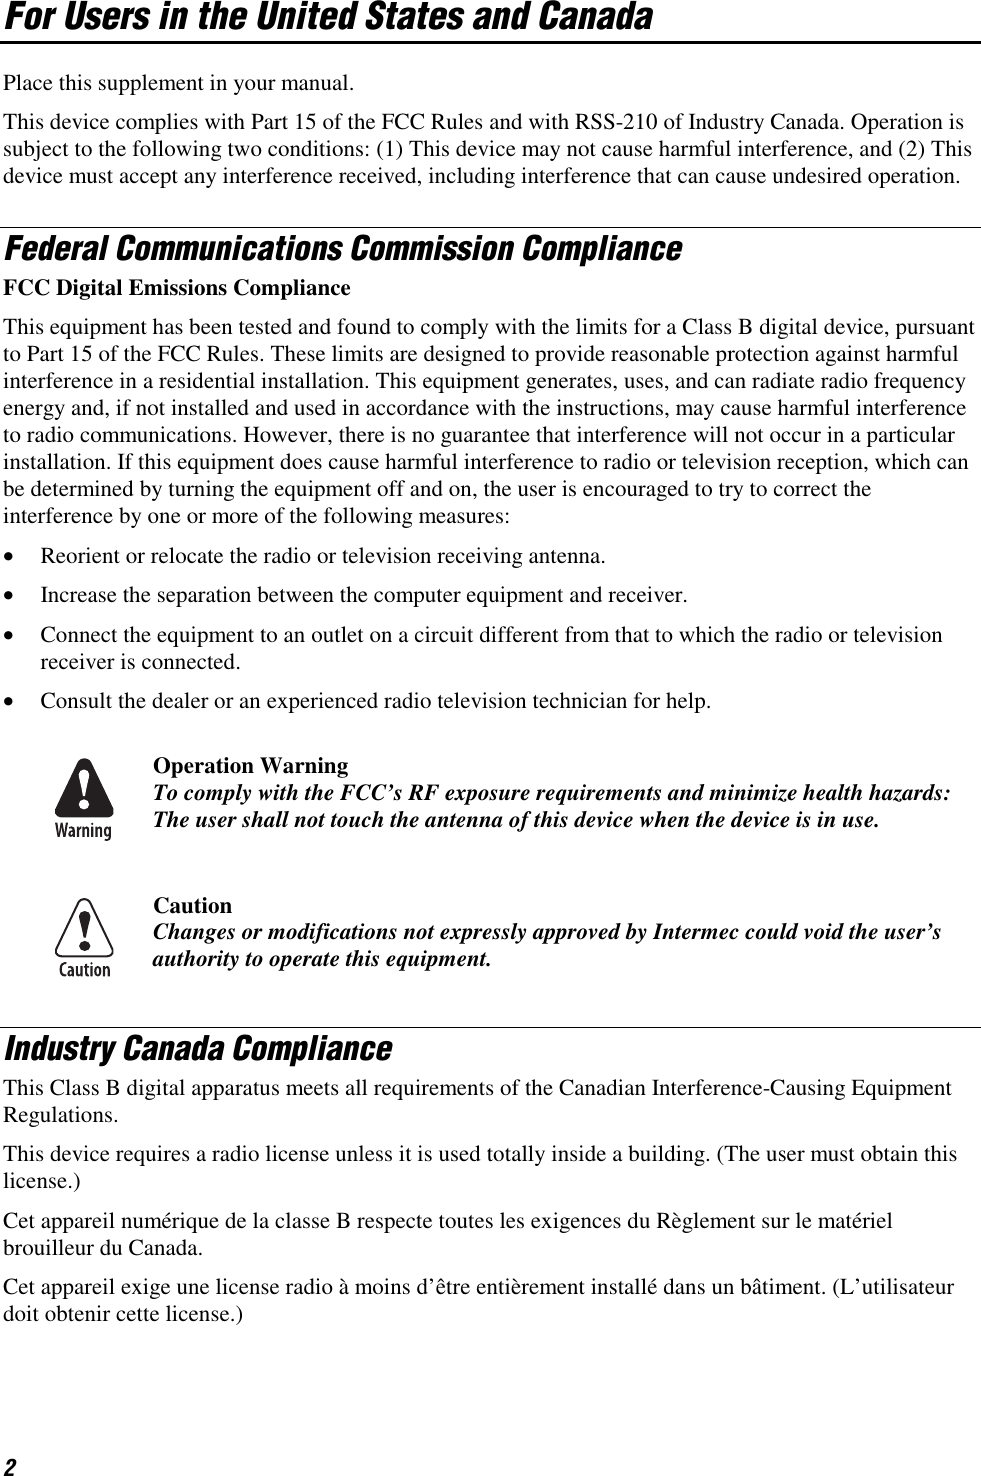 2 For Users in the United States and Canada Place this supplement in your manual. This device complies with Part 15 of the FCC Rules and with RSS-210 of Industry Canada. Operation is subject to the following two conditions: (1) This device may not cause harmful interference, and (2) This device must accept any interference received, including interference that can cause undesired operation. Federal Communications Commission Compliance  FCC Digital Emissions Compliance This equipment has been tested and found to comply with the limits for a Class B digital device, pursuant to Part 15 of the FCC Rules. These limits are designed to provide reasonable protection against harmful interference in a residential installation. This equipment generates, uses, and can radiate radio frequency energy and, if not installed and used in accordance with the instructions, may cause harmful interference to radio communications. However, there is no guarantee that interference will not occur in a particular installation. If this equipment does cause harmful interference to radio or television reception, which can be determined by turning the equipment off and on, the user is encouraged to try to correct the interference by one or more of the following measures: •  Reorient or relocate the radio or television receiving antenna. •  Increase the separation between the computer equipment and receiver. •  Connect the equipment to an outlet on a circuit different from that to which the radio or television receiver is connected. •  Consult the dealer or an experienced radio television technician for help.  Operation Warning To comply with the FCC’s RF exposure requirements and minimize health hazards: The user shall not touch the antenna of this device when the device is in use.  Caution Changes or modifications not expressly approved by Intermec could void the user’s authority to operate this equipment. Industry Canada Compliance This Class B digital apparatus meets all requirements of the Canadian Interference-Causing Equipment Regulations. This device requires a radio license unless it is used totally inside a building. (The user must obtain this license.) Cet appareil numérique de la classe B respecte toutes les exigences du Règlement sur le matériel brouilleur du Canada. Cet appareil exige une license radio à moins d’être entièrement installé dans un bâtiment. (L’utilisateur doit obtenir cette license.) 